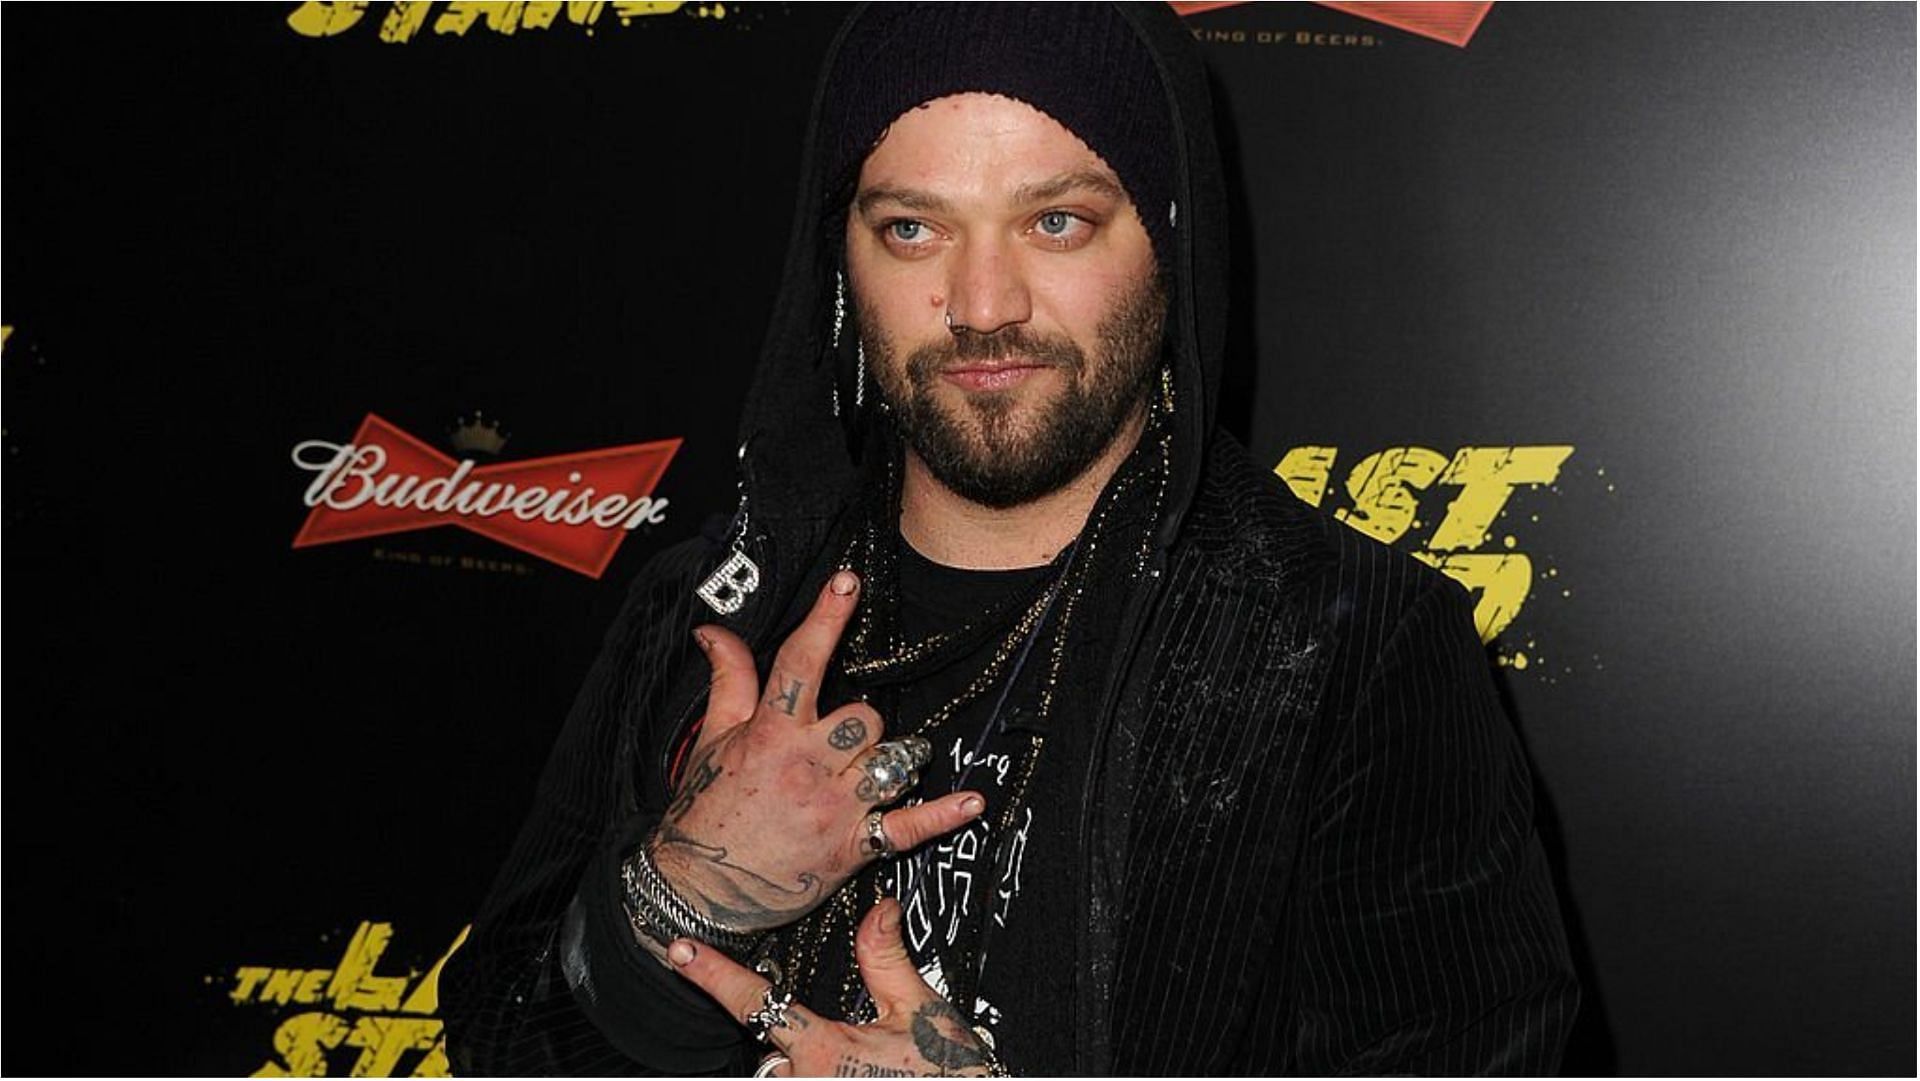 Bam Margera has been hospitalized for sometime due to pneumonia and Covid-19 complications (Image via Kevin Winter/Getty Images)